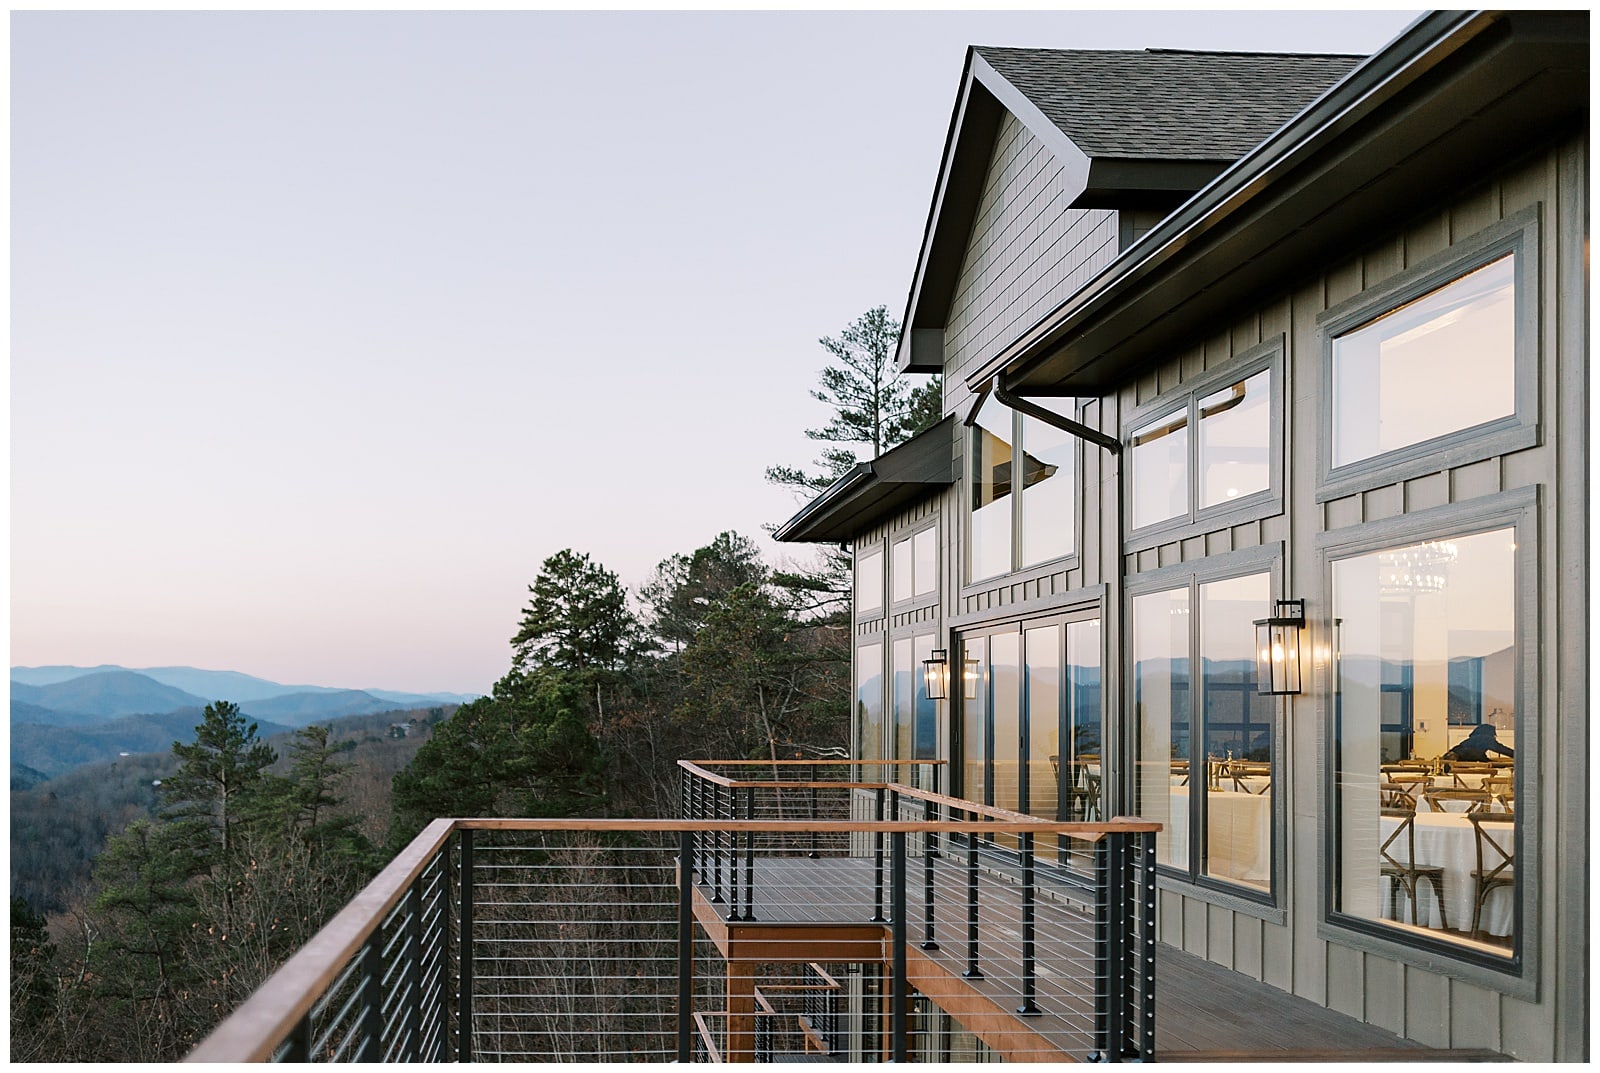 Sunrise view of the Smoky Mountains from The Trillium Venue